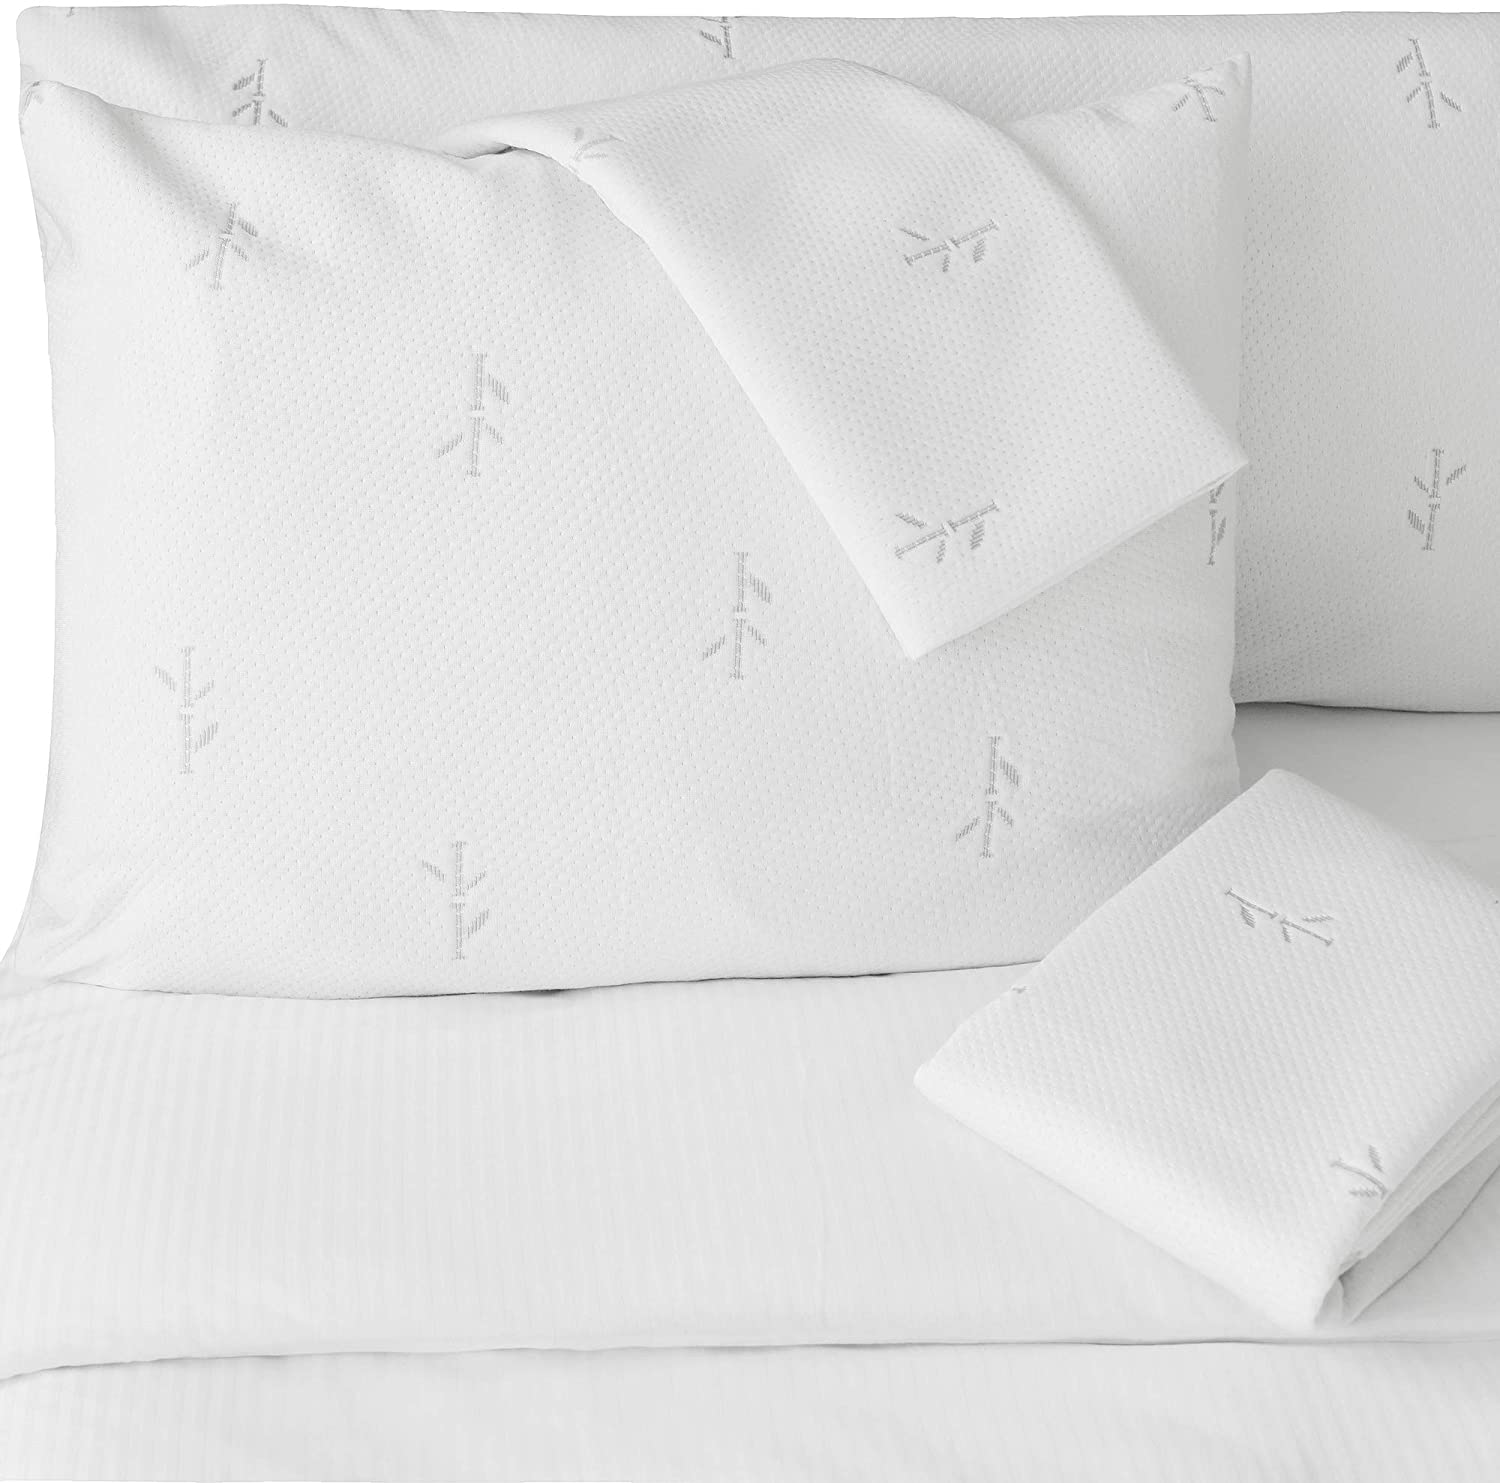 Set of 2 Euro Size SureGuard Pillow Protectors - 100% Waterproof, Bed Bug Proof, Hypoallergenic - Premium Zippered Cotton Covers - Smooth